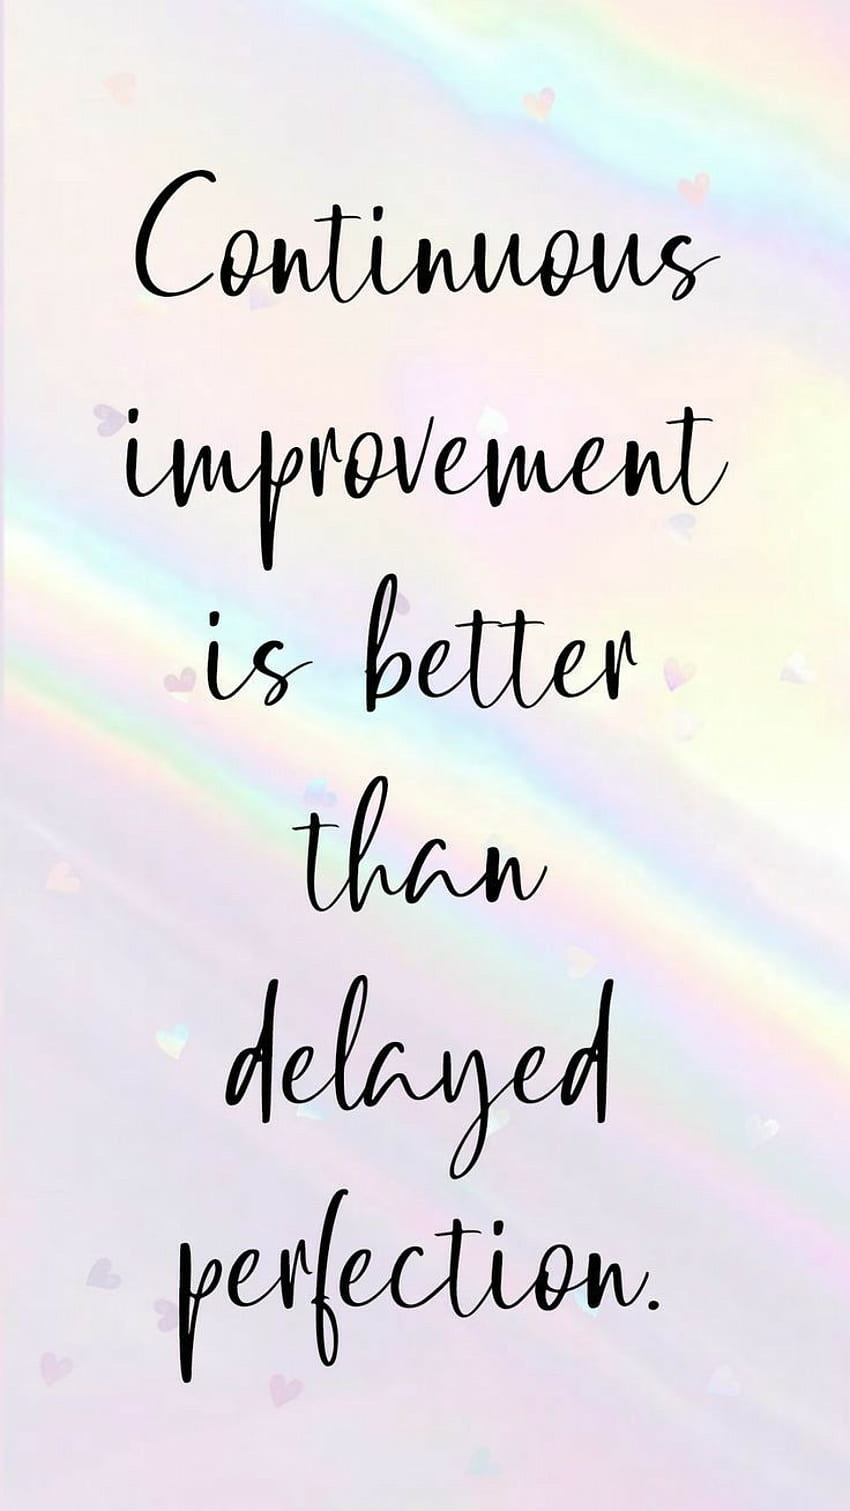 Continuous improvement is better than delayed perfection. Comfort quotes, Daily inspiration quotes, Phone quotes HD phone wallpaper